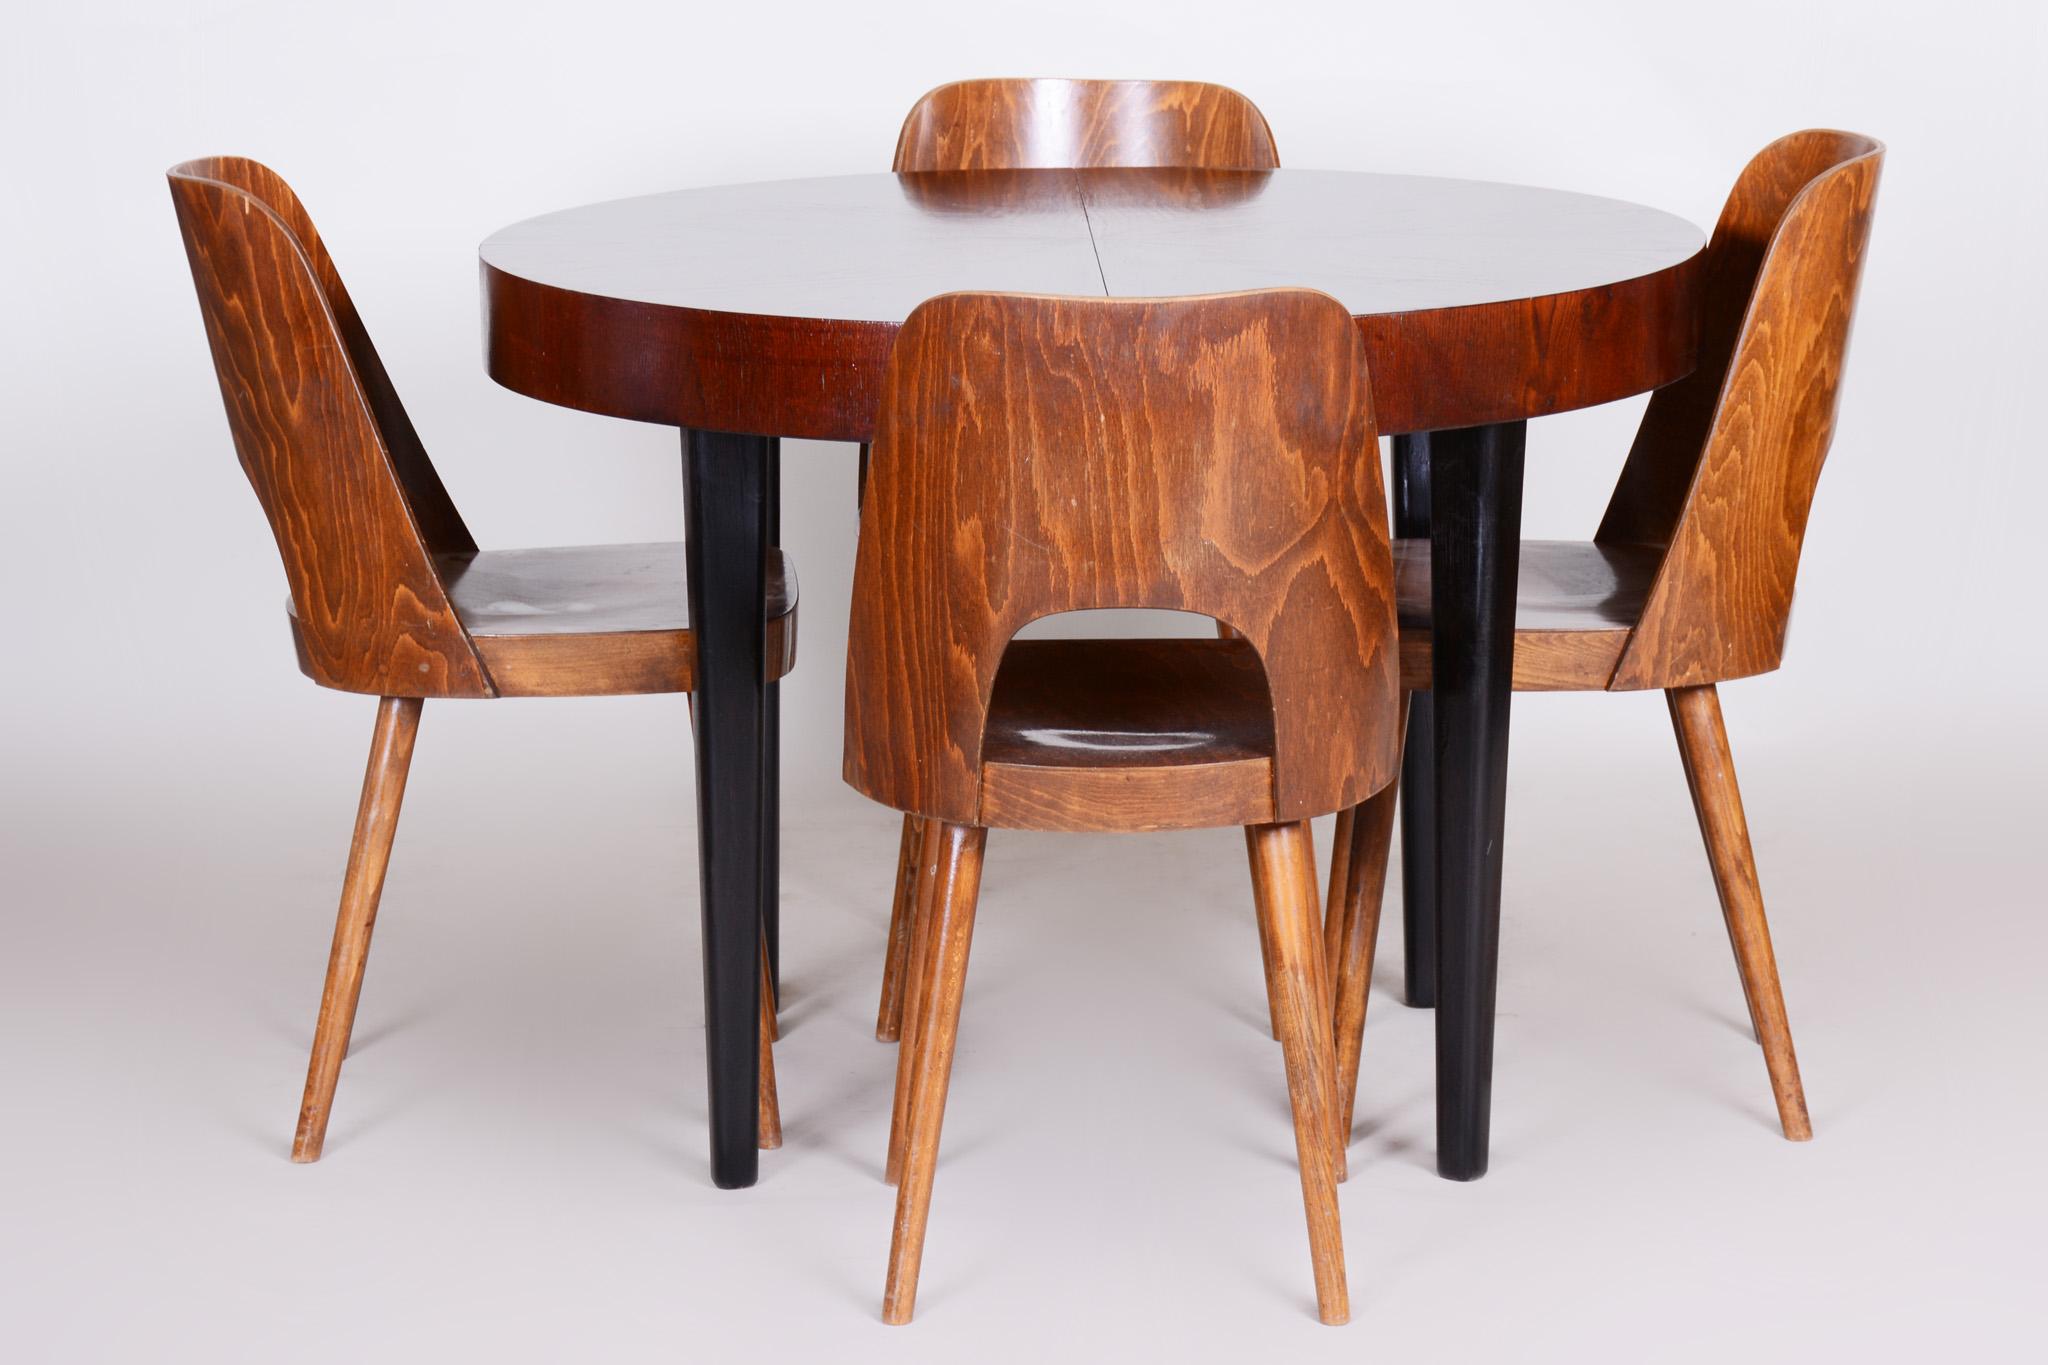 Fully Restored Art Deco Dining Table Made in the 1940s in Czechia, Beech and Oak 5